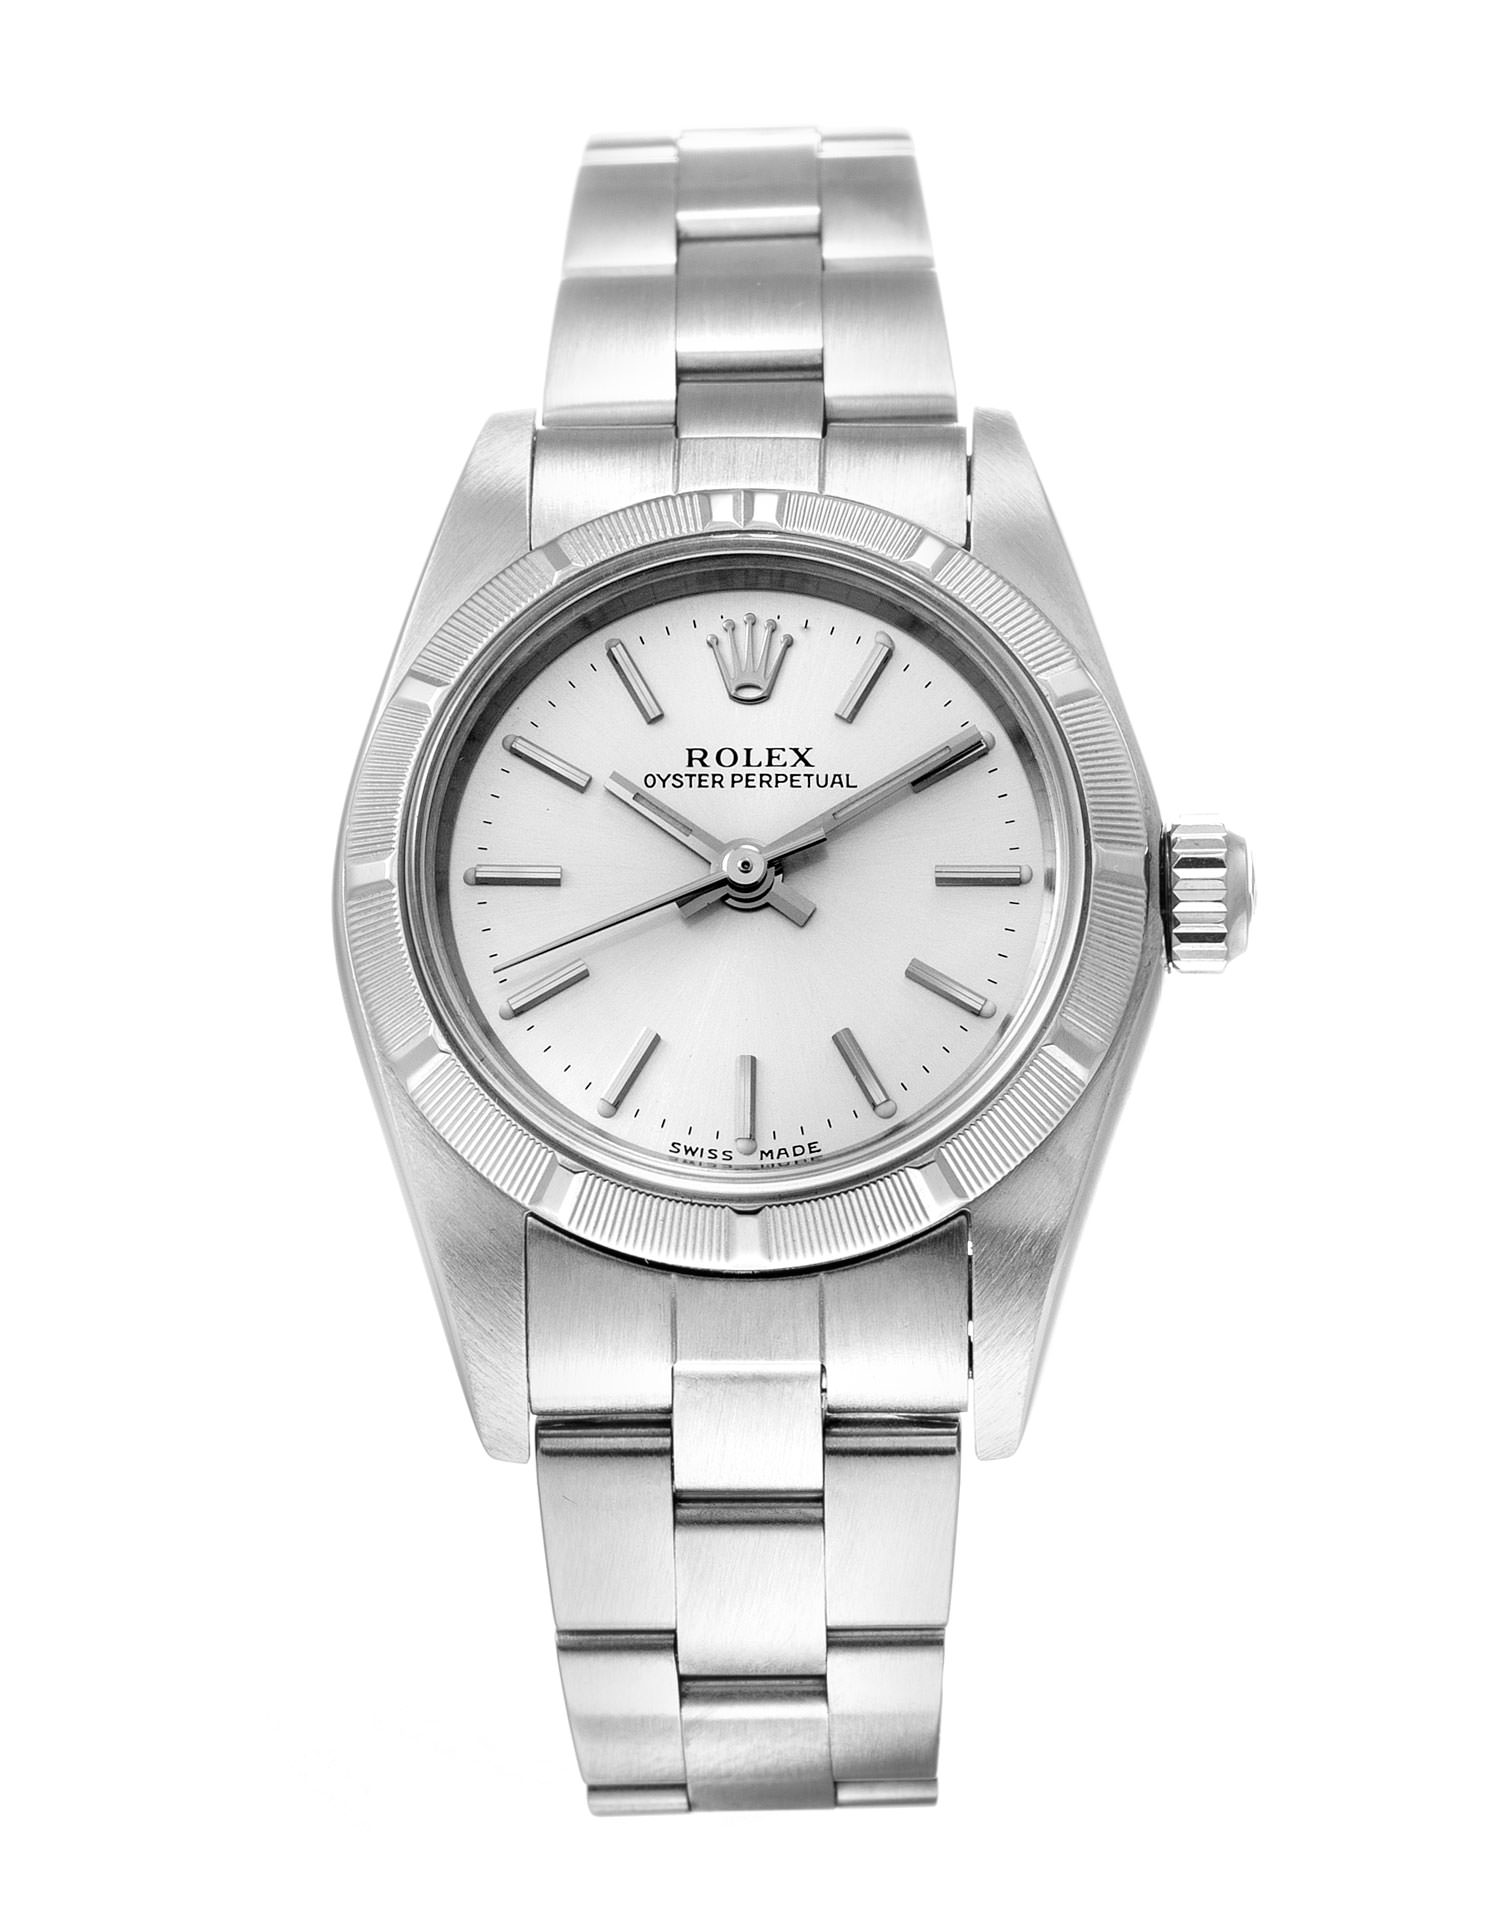 Rolex Oyster Perpetual 76030 